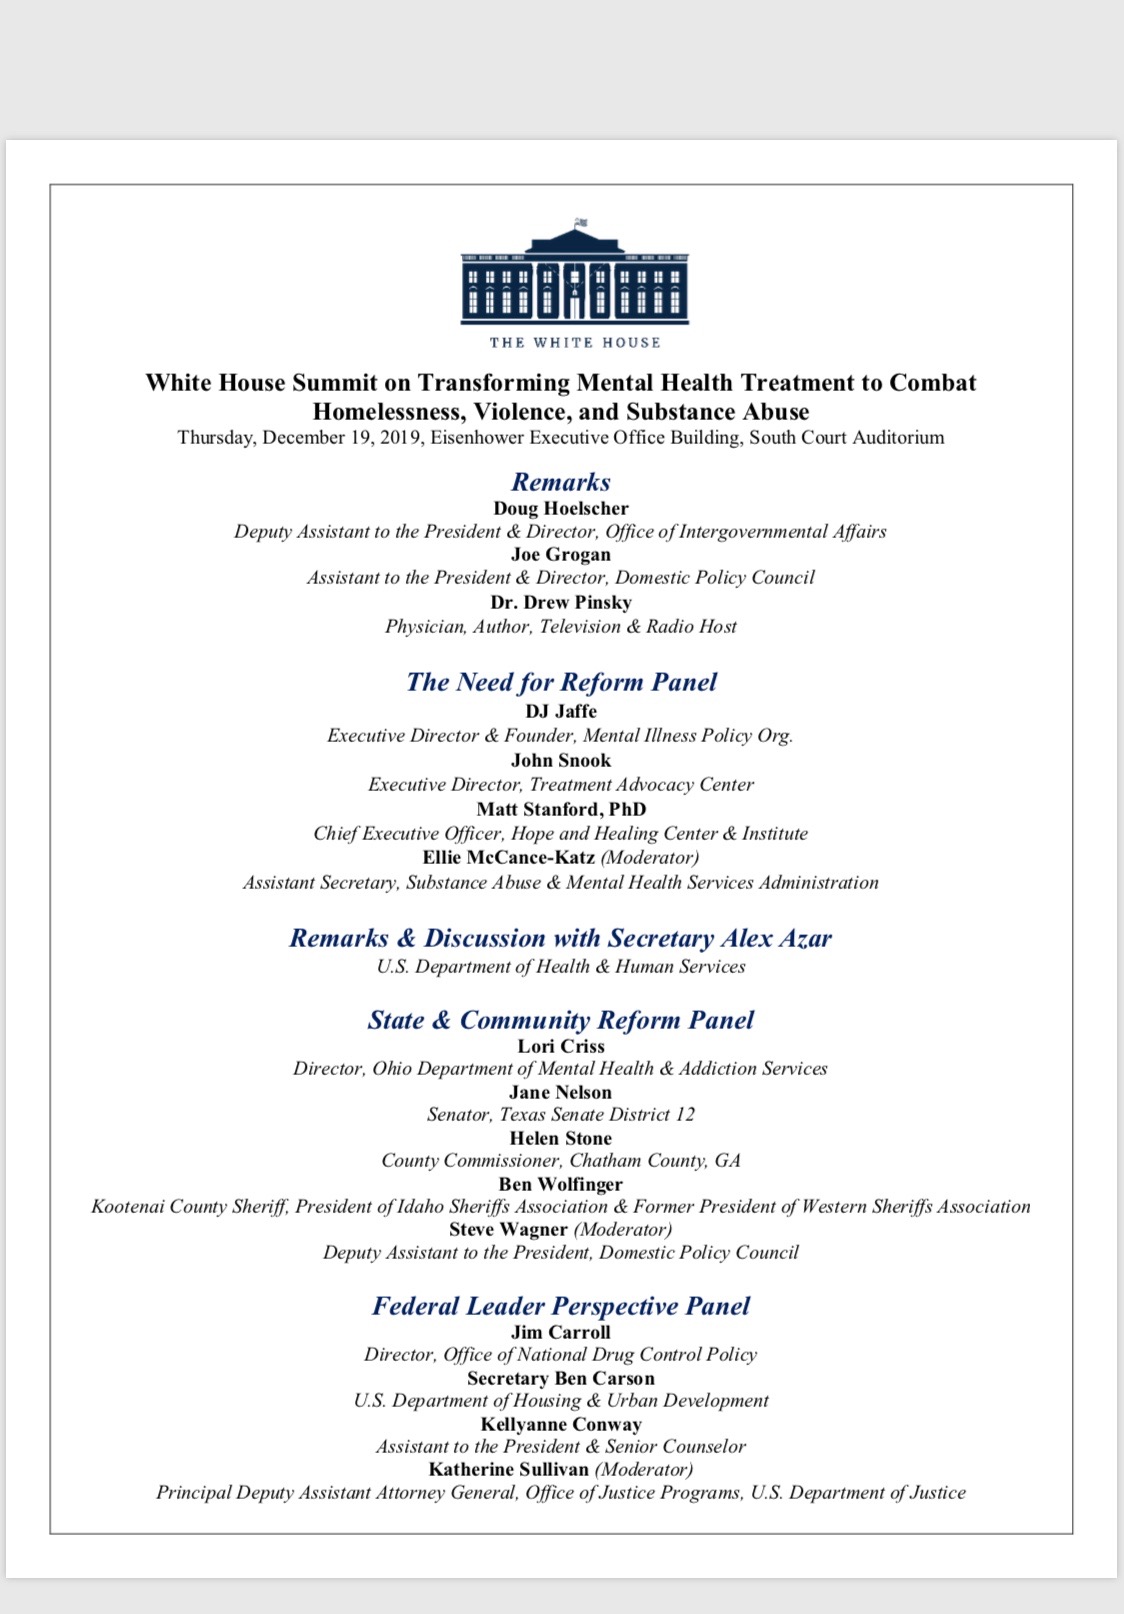 WHITE HOUSE SUMMIT ON TRANSFORMING MH 121919